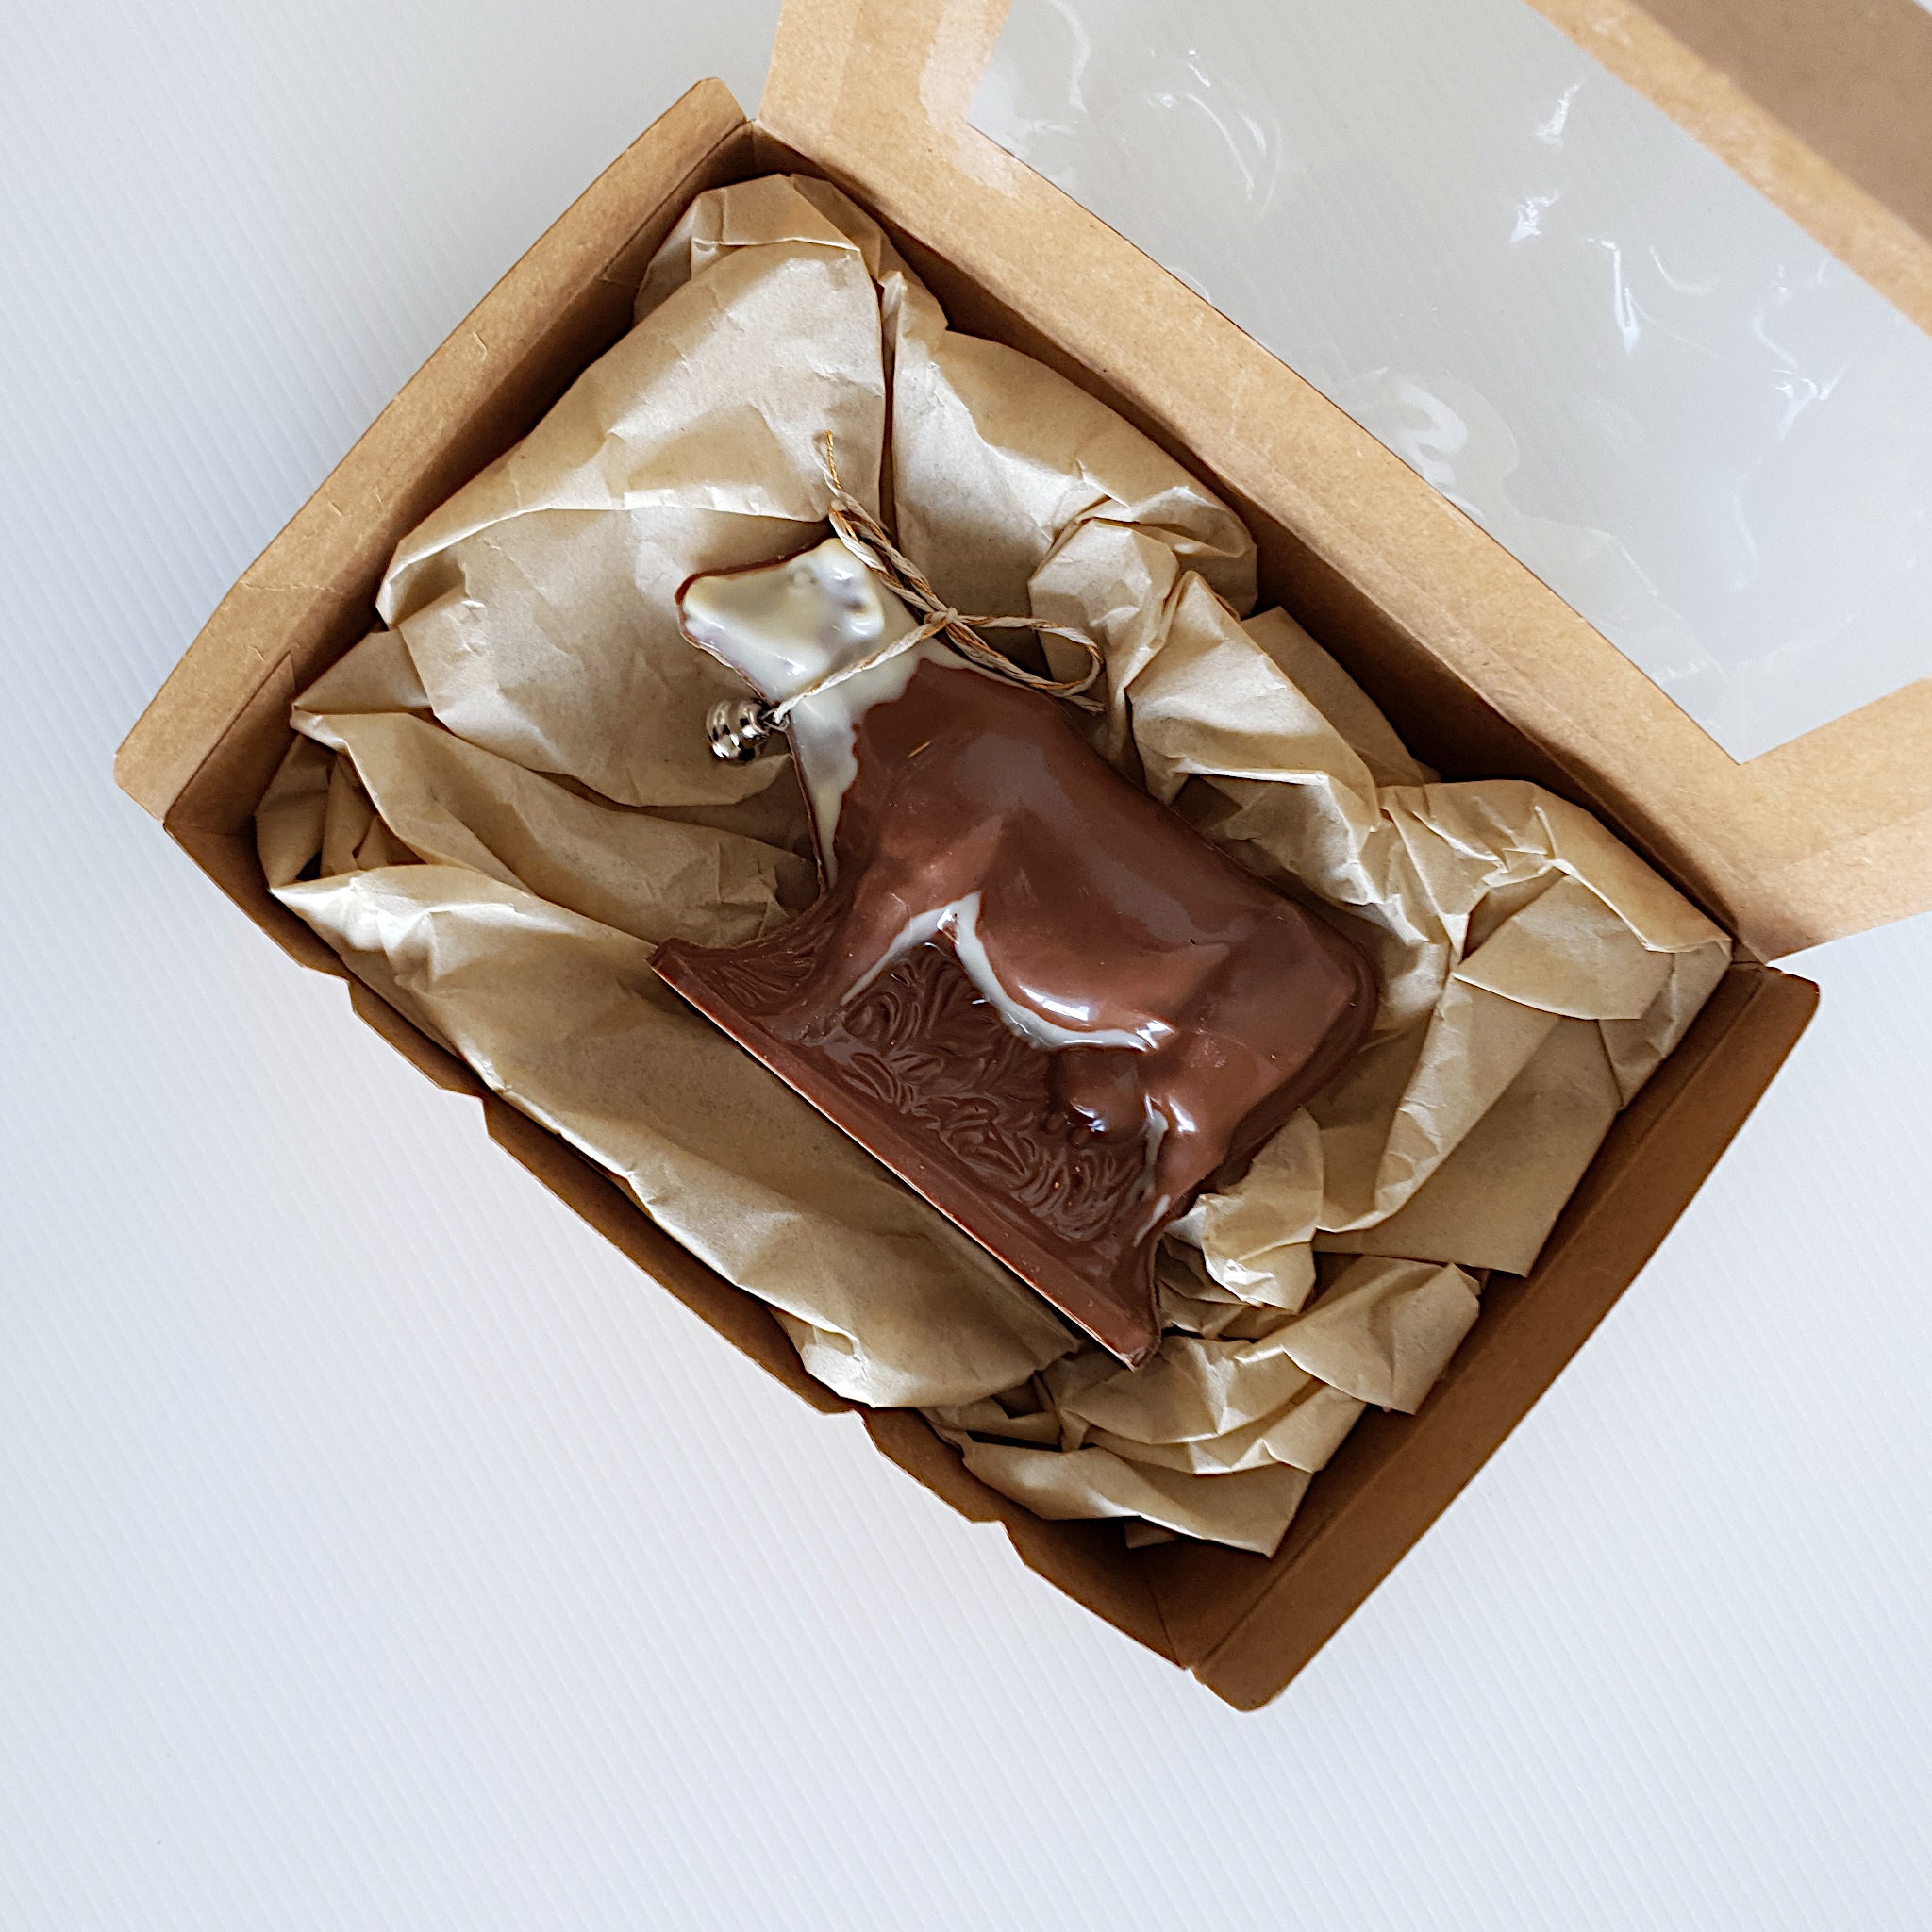 Handmade Belgian chocolate cow made in Milton NSW at Woodstock Chocolate Co. 